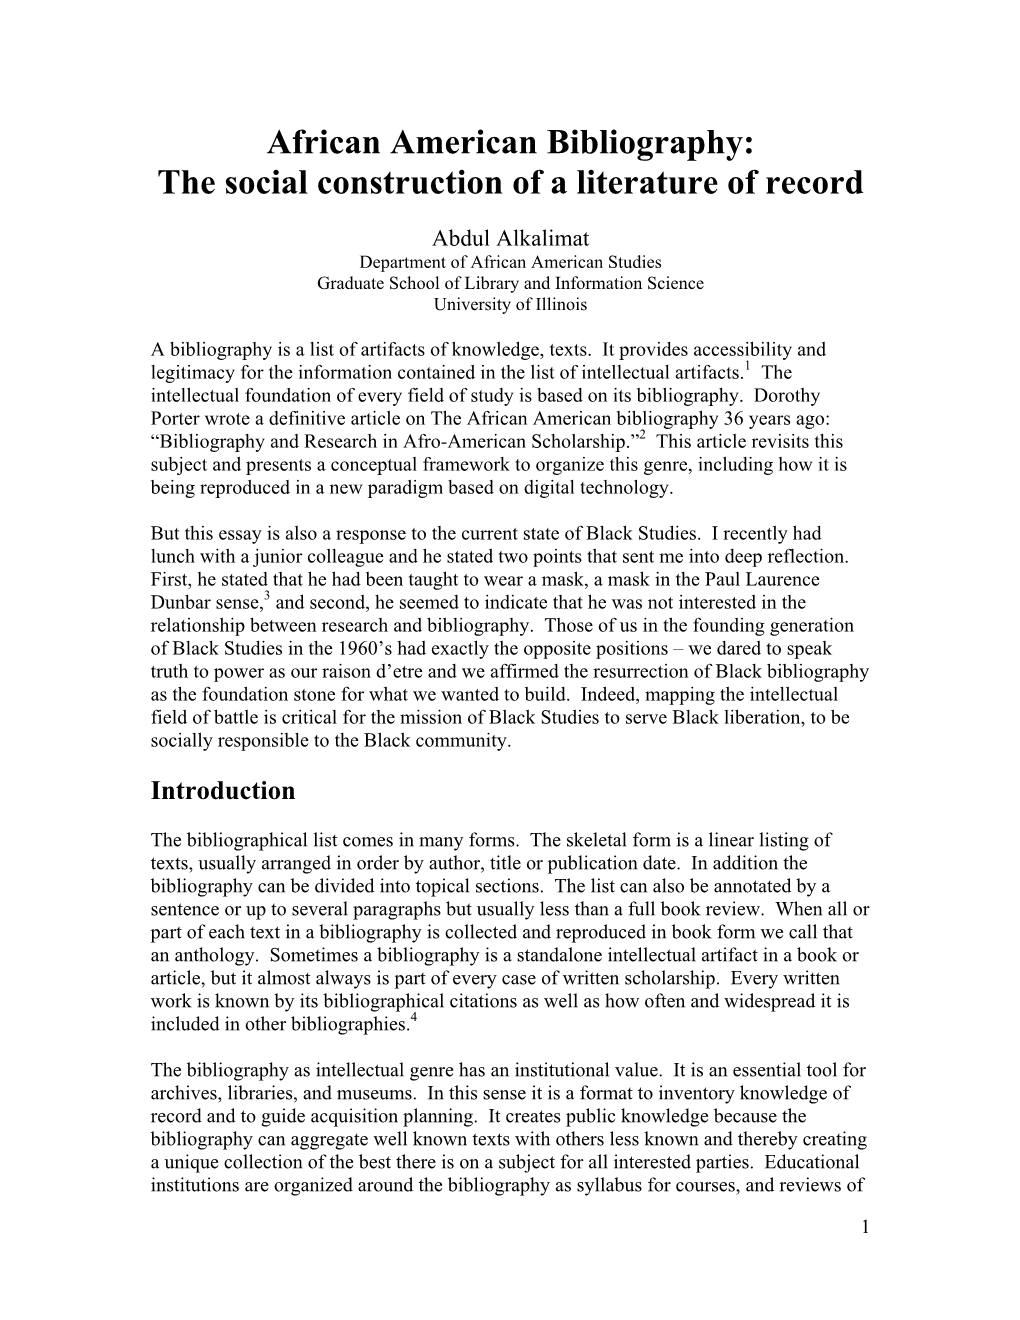 African American Bibliography: the Social Construction of a Literature of Record